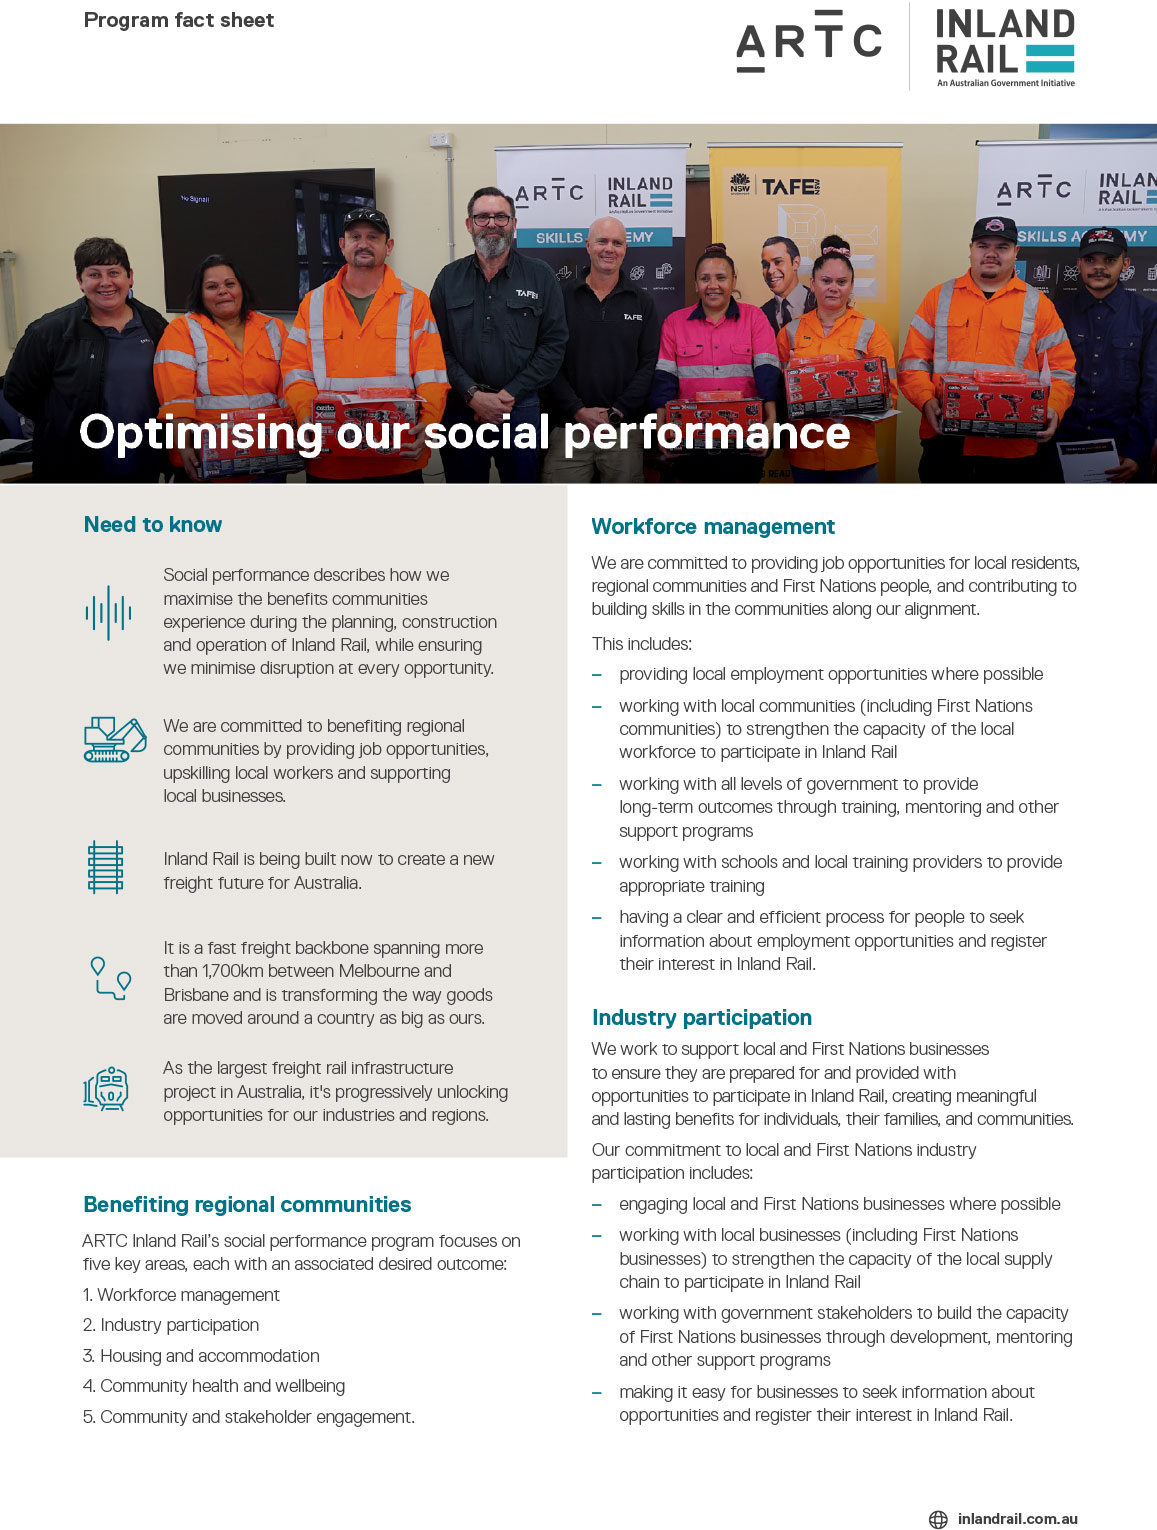 Image thumbnail for Optimising our social performance fact sheet